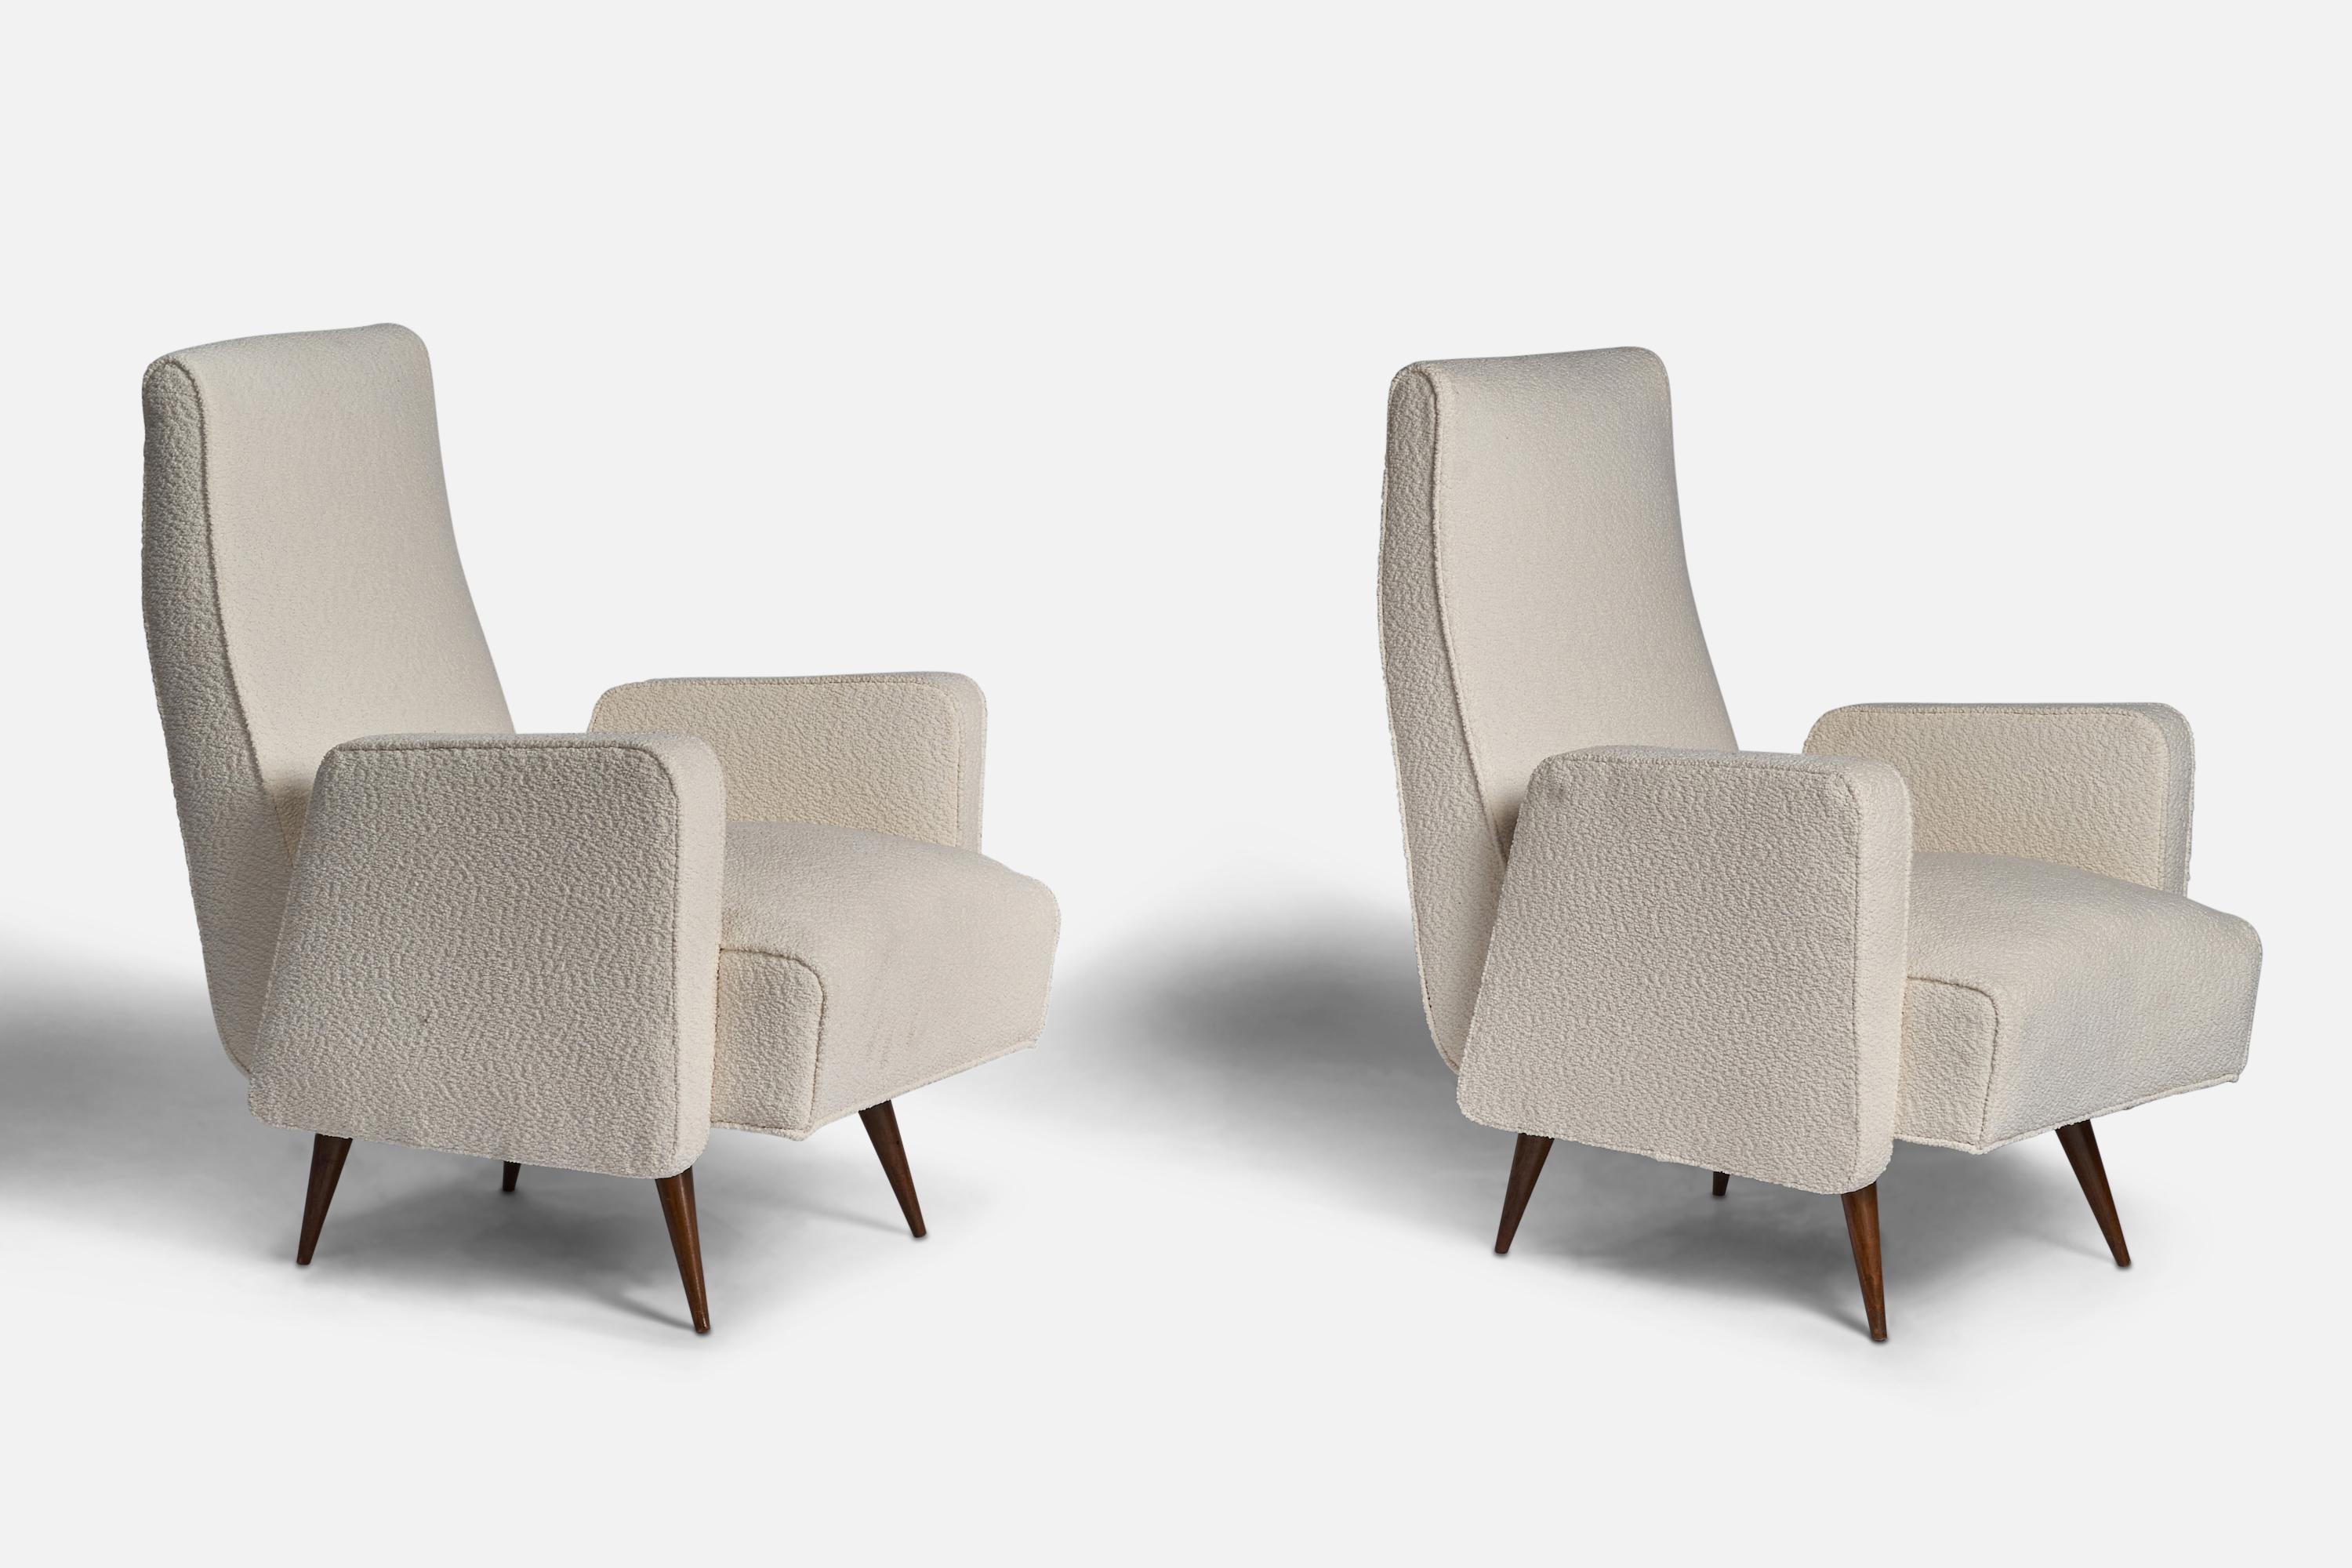 A pair of white bouclé fabric and wood lounge chairs designed and produced in Italy, 1950s.
Seat height: 14.75